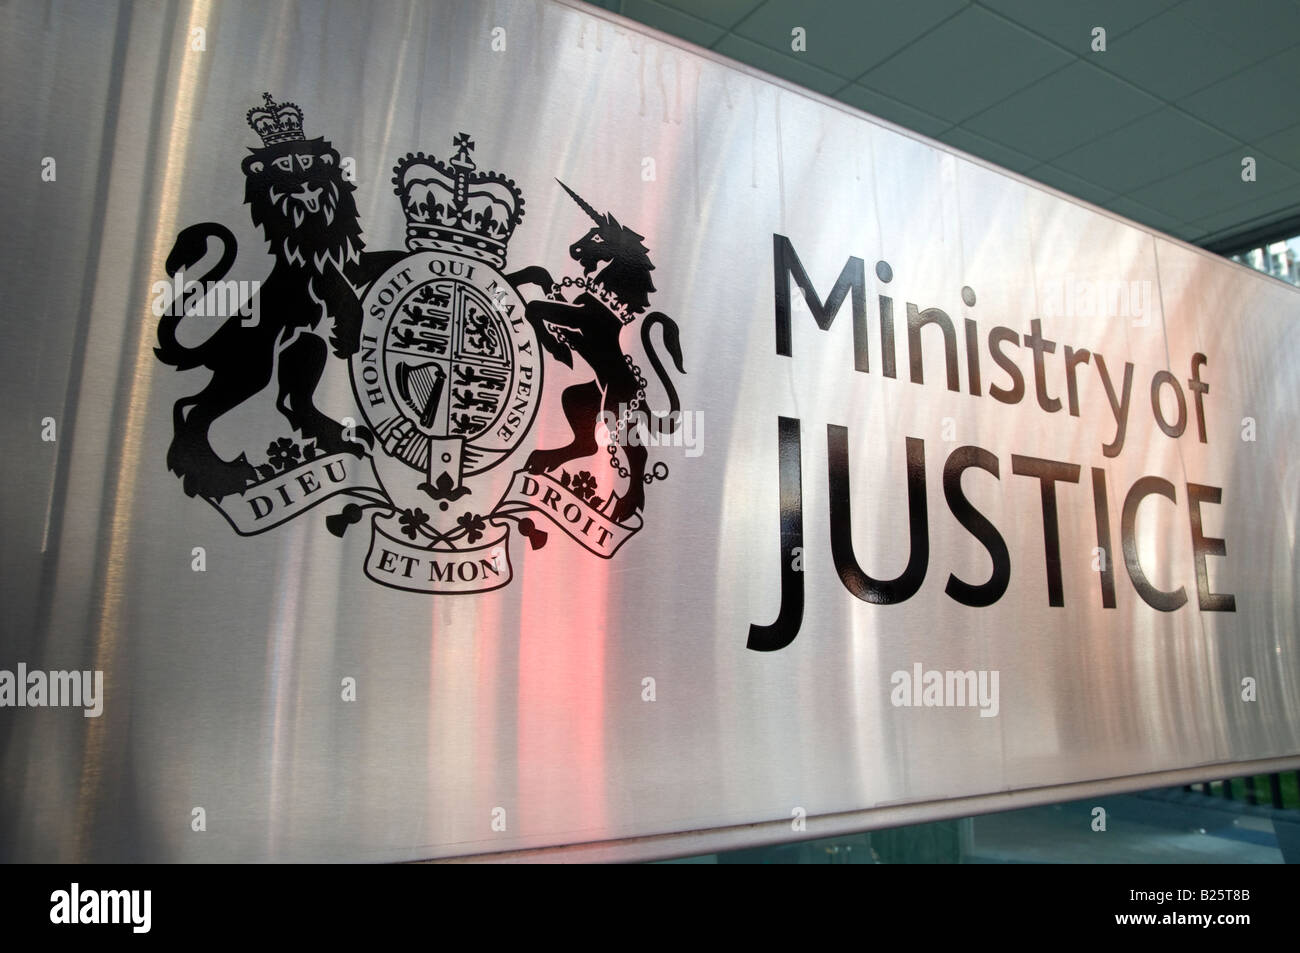 Ministry of Justice London England UK Stock Photo